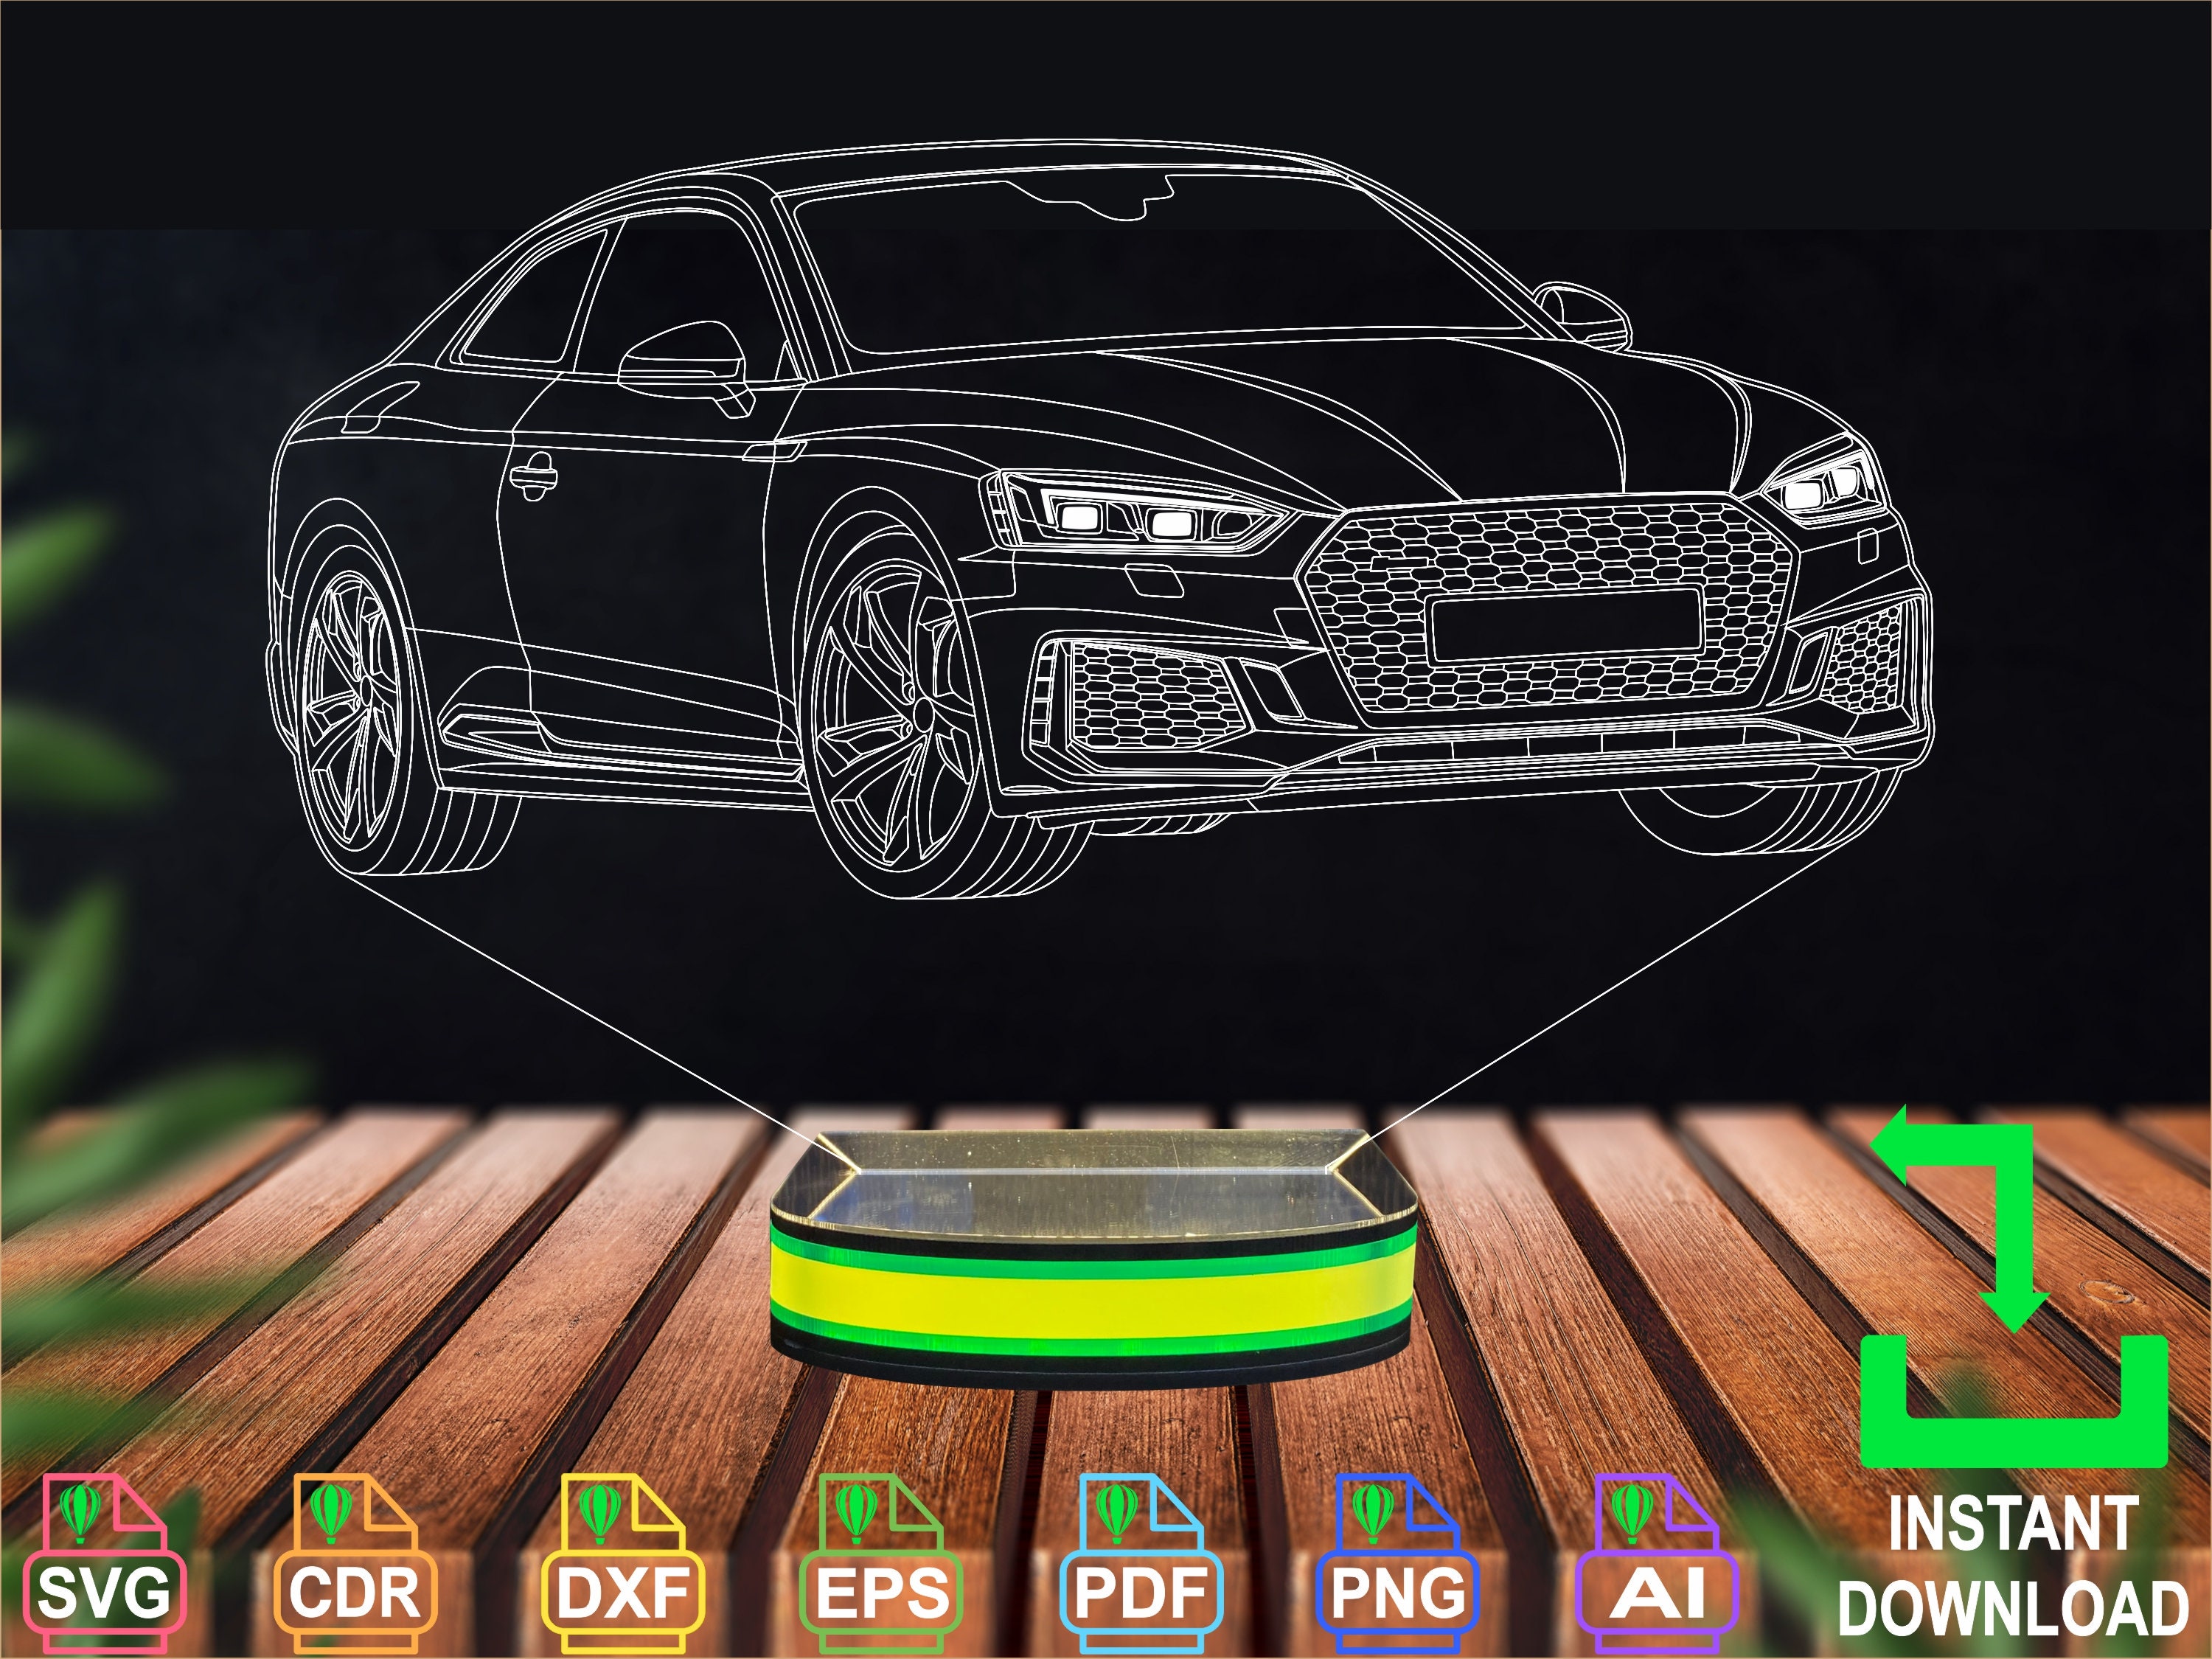 Vehicles Modified Audi RS 5 Wide Body Sports Car Poster Canvas Painting  Wall Art Prints Picture Living Room Modern Home Decor - AliExpress